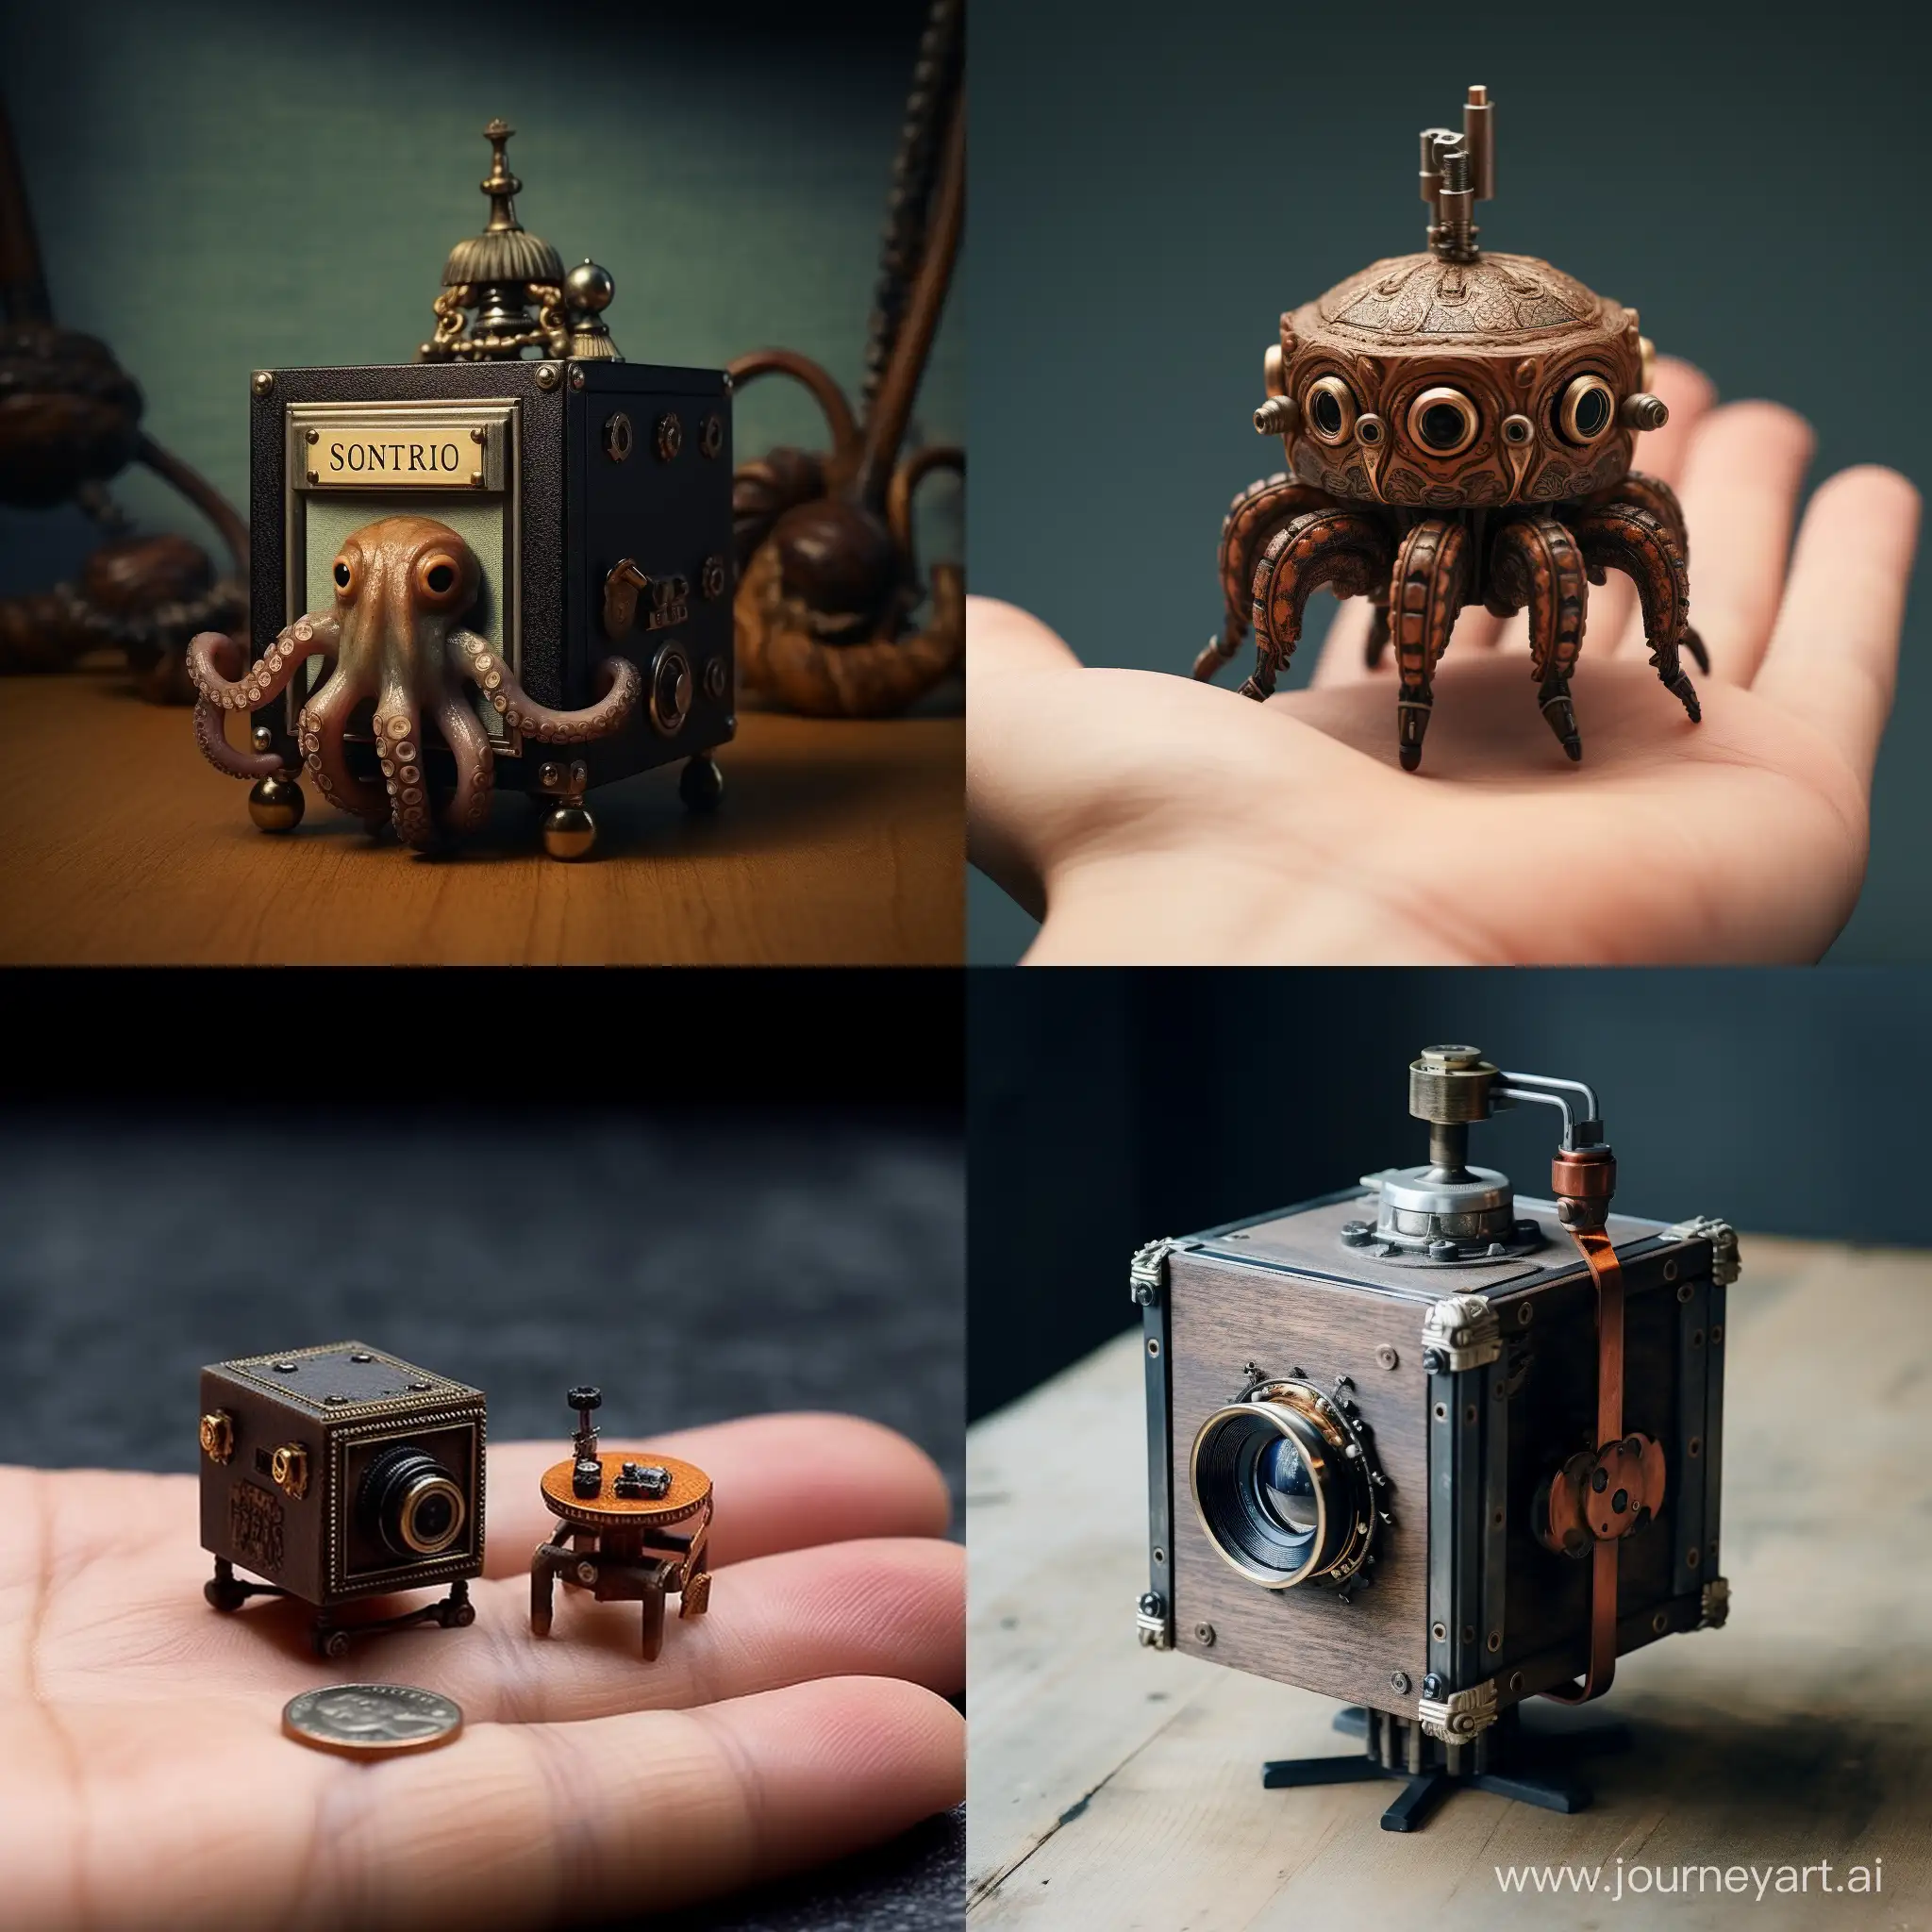 the world's smallest octobox (attachment for photographic equipment)